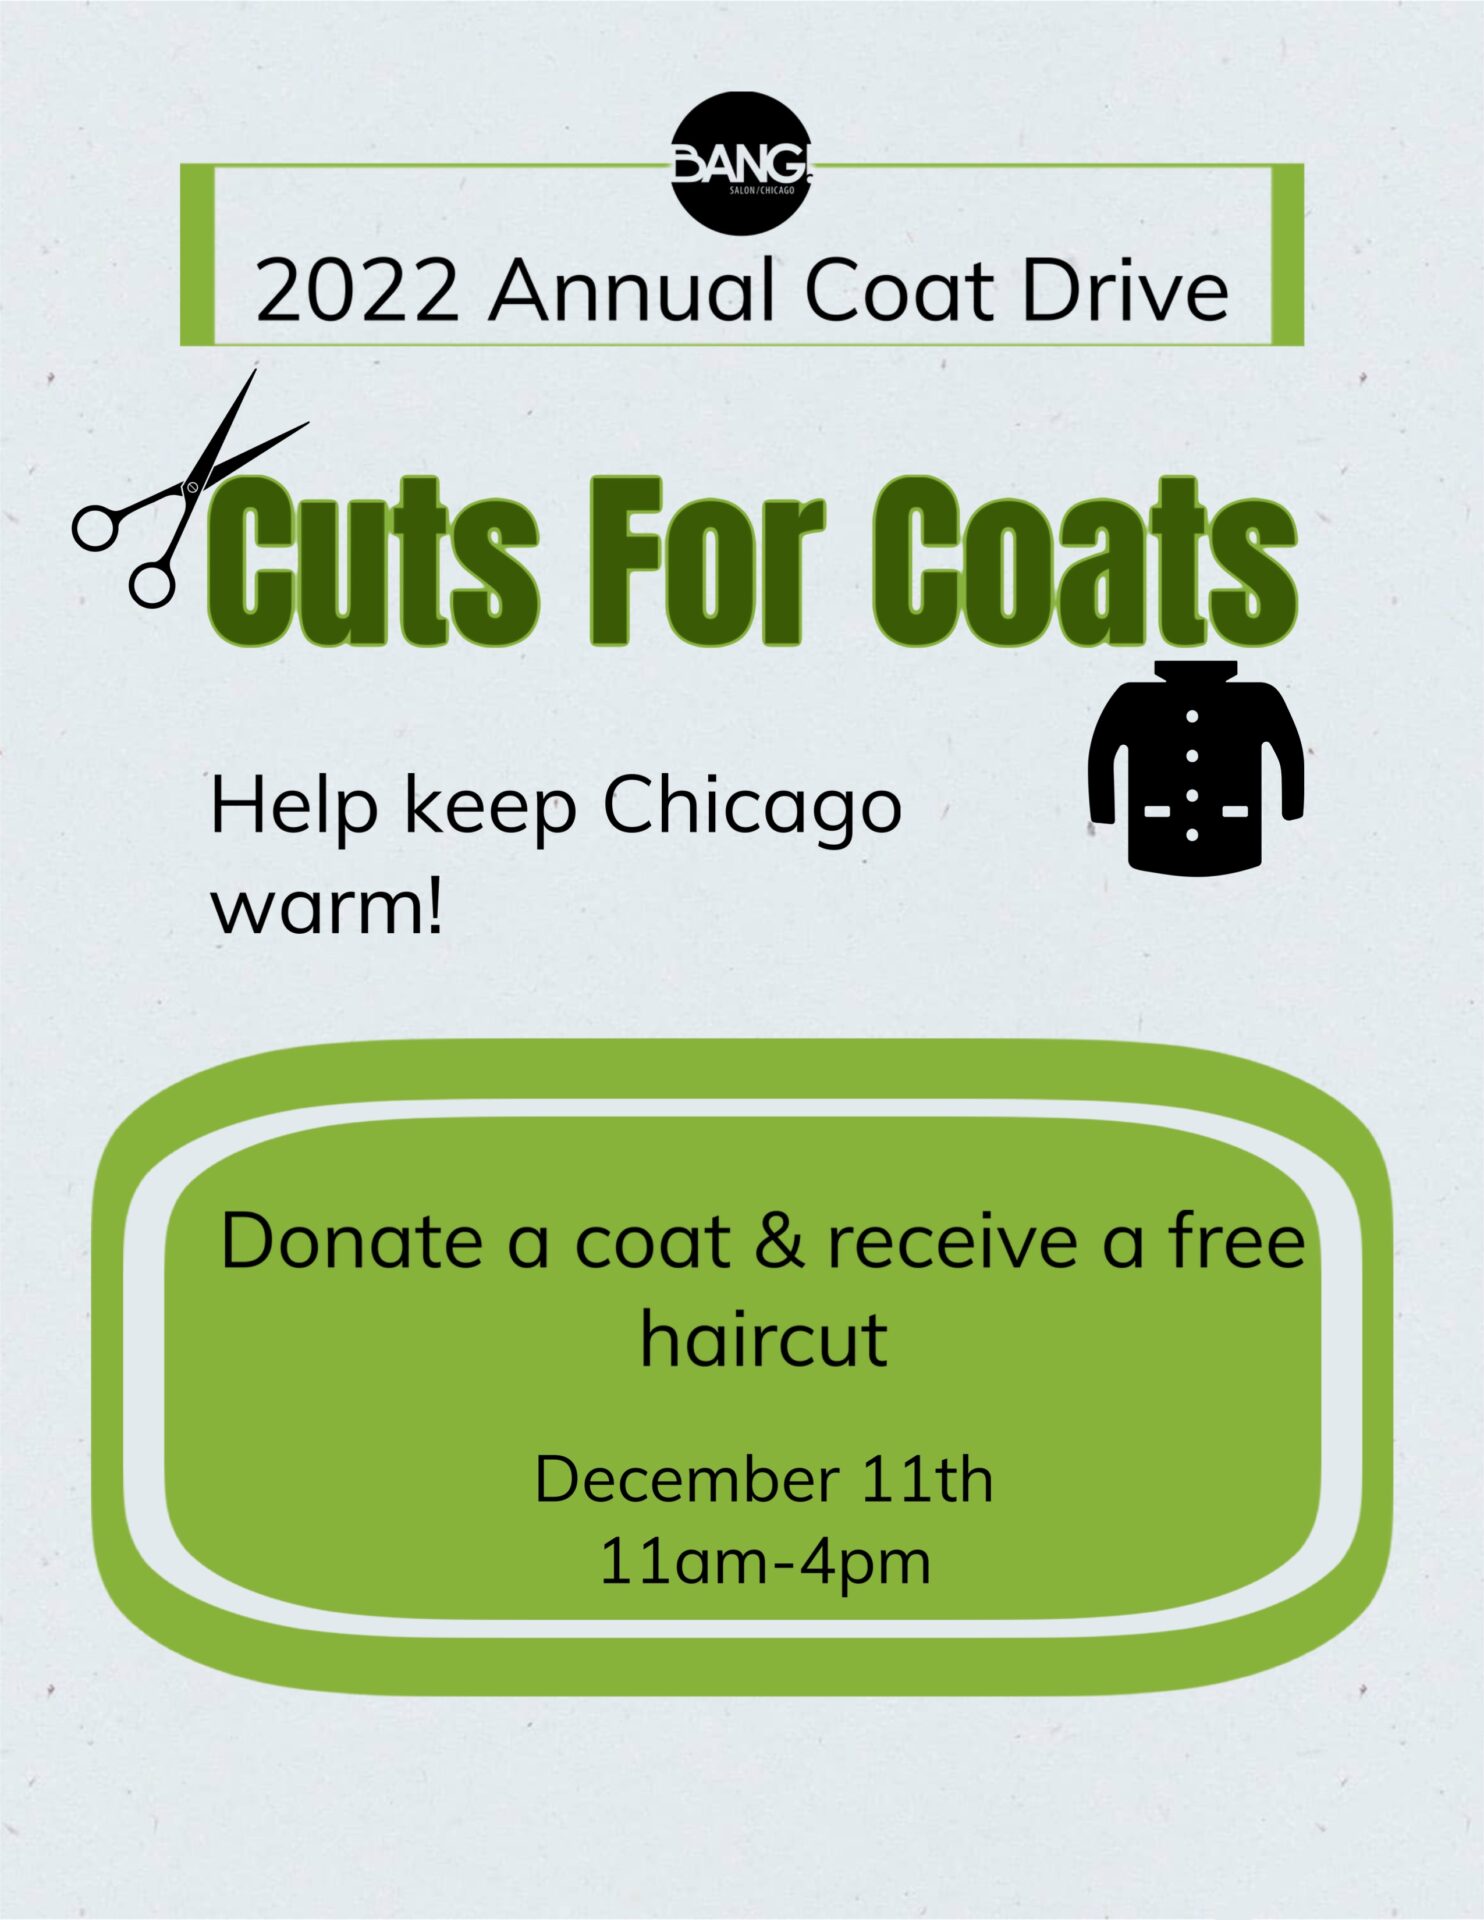 Cuts for Coats is Back! Donate a coat and get a free haircut!